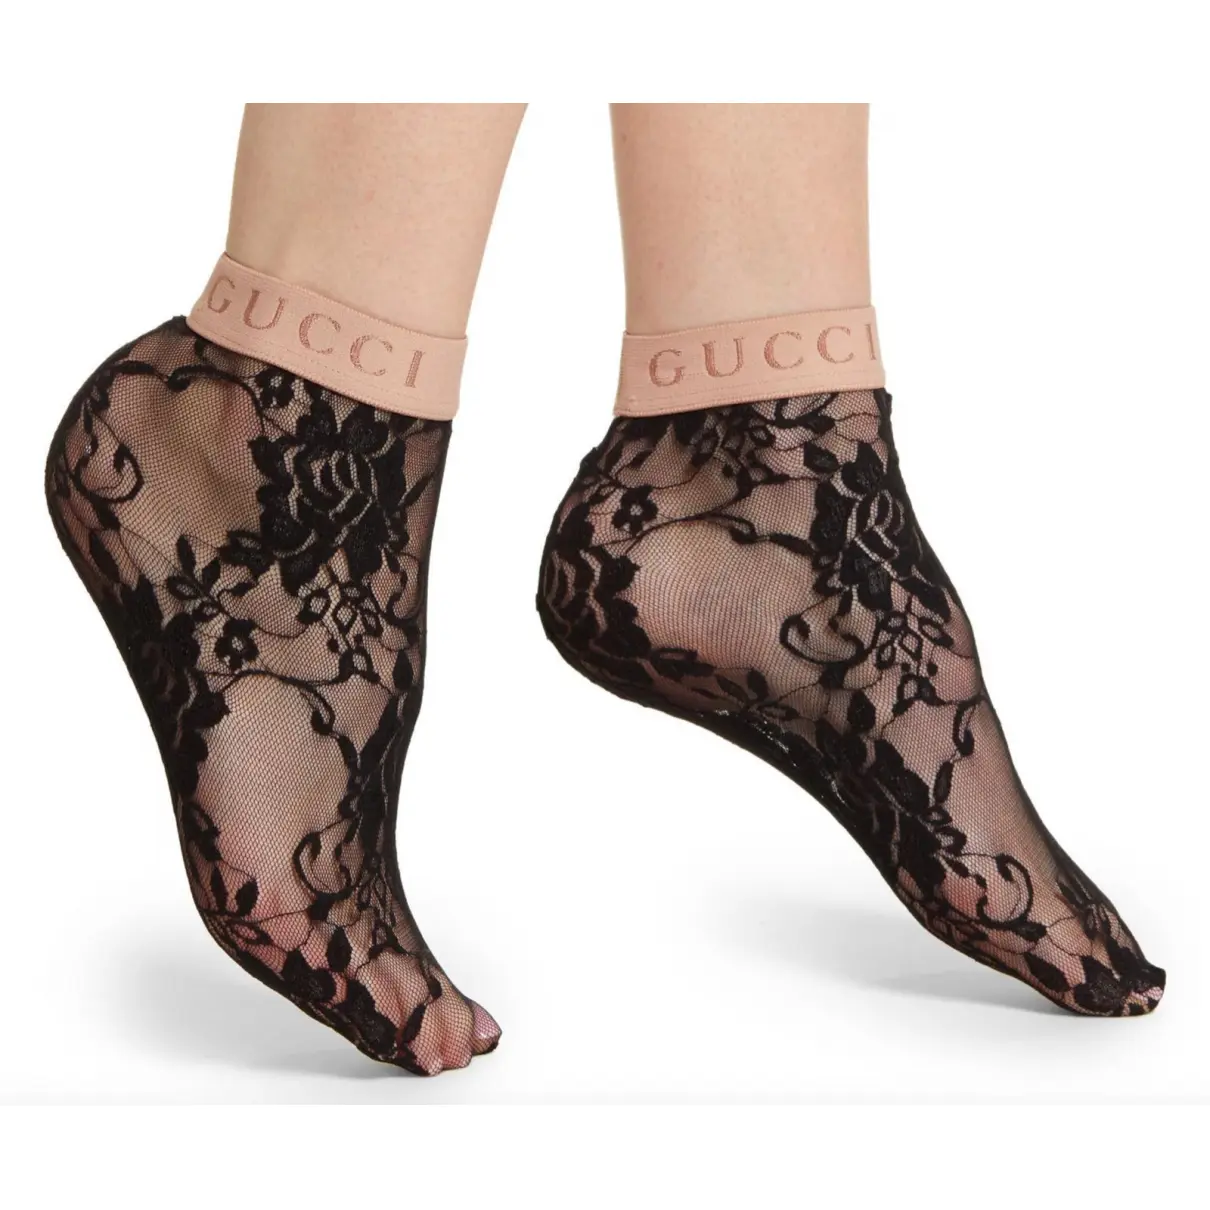 Buy Gucci Lace tight online